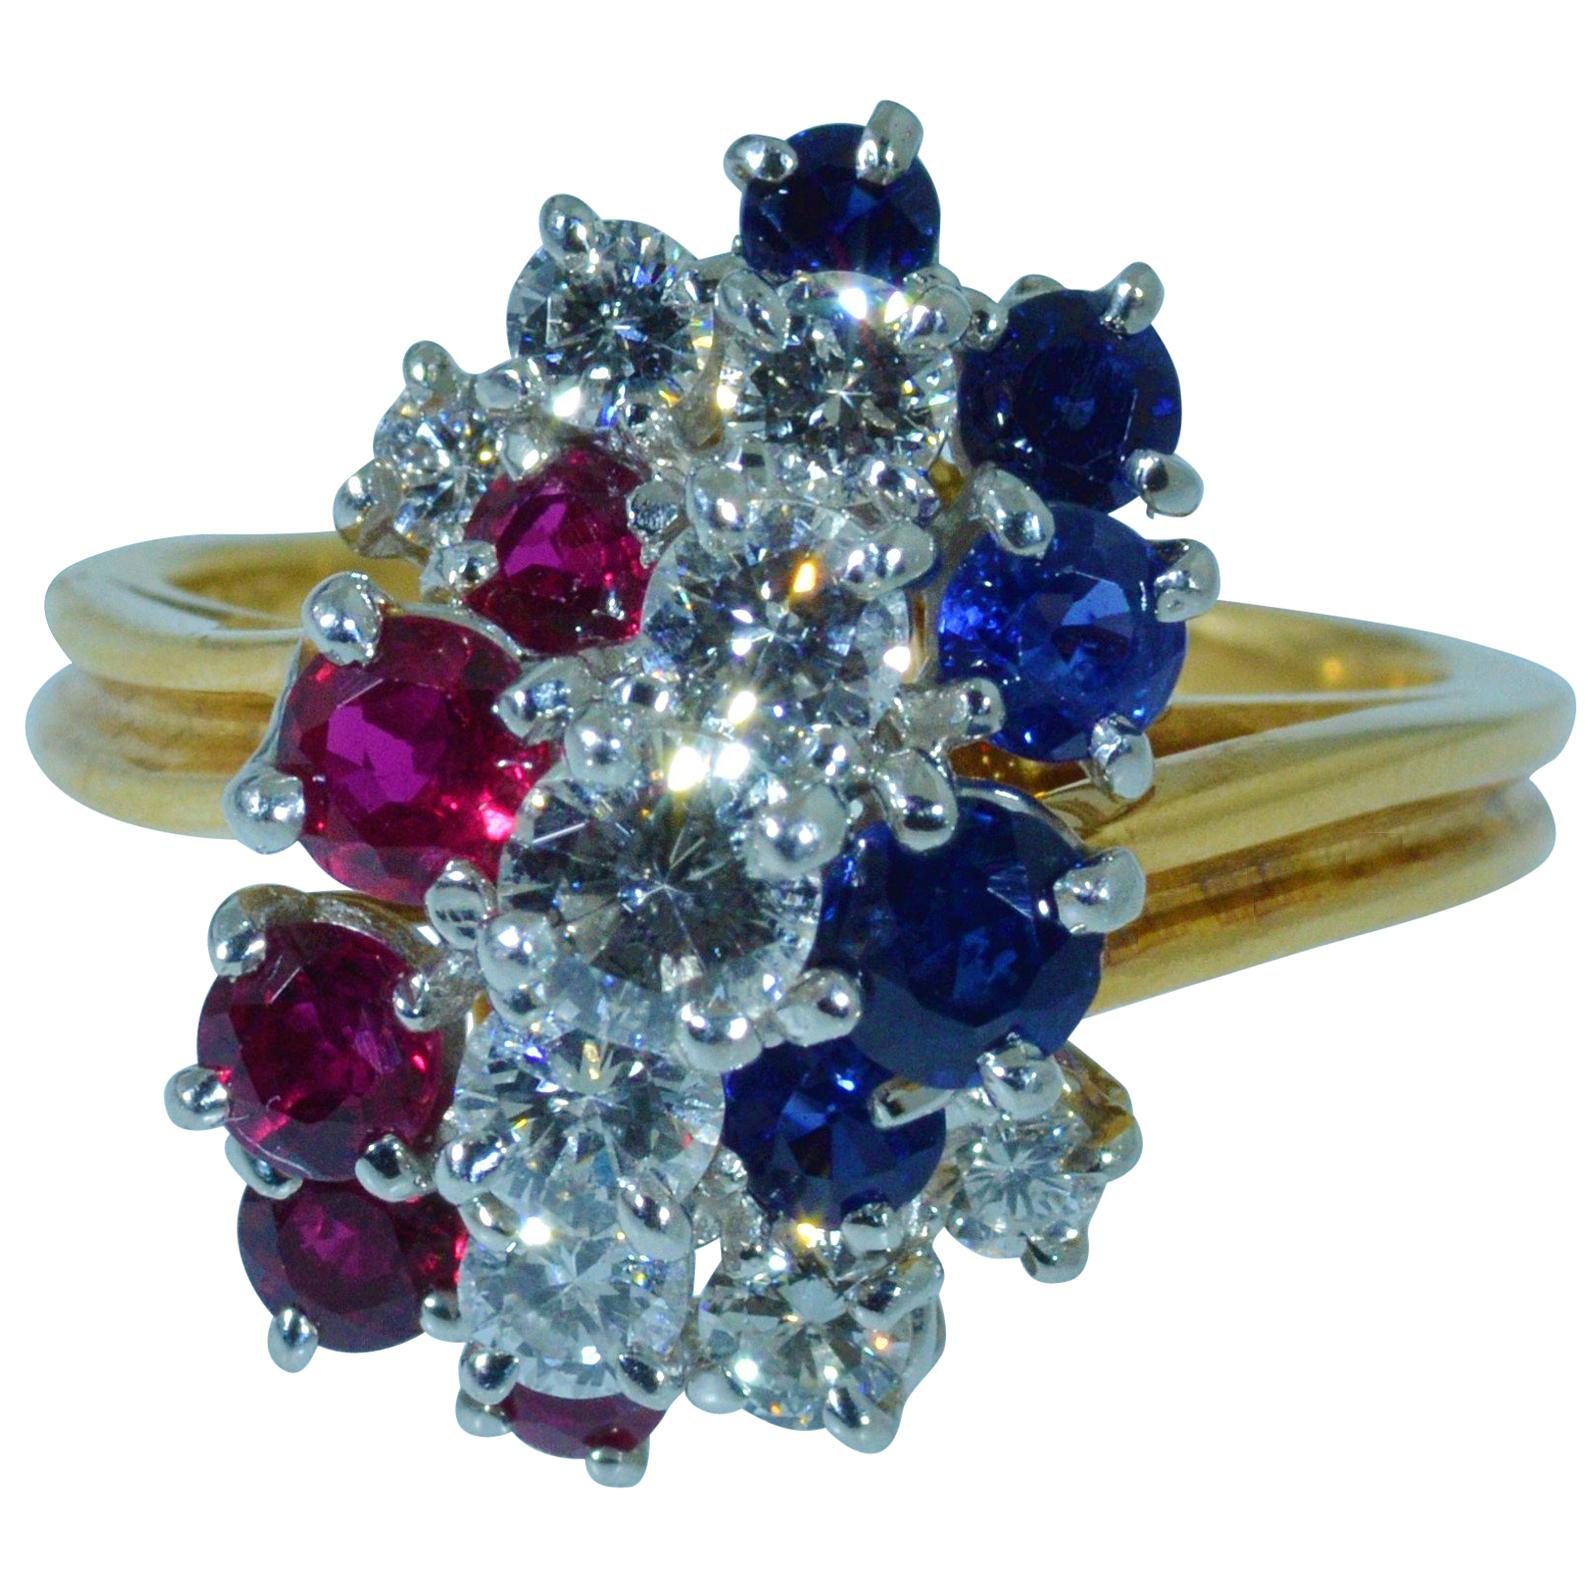 Patriotic Oscar Heyman Signed Ruby, Diamond, Sapphire Ring in 18 Karat and Plat For Sale